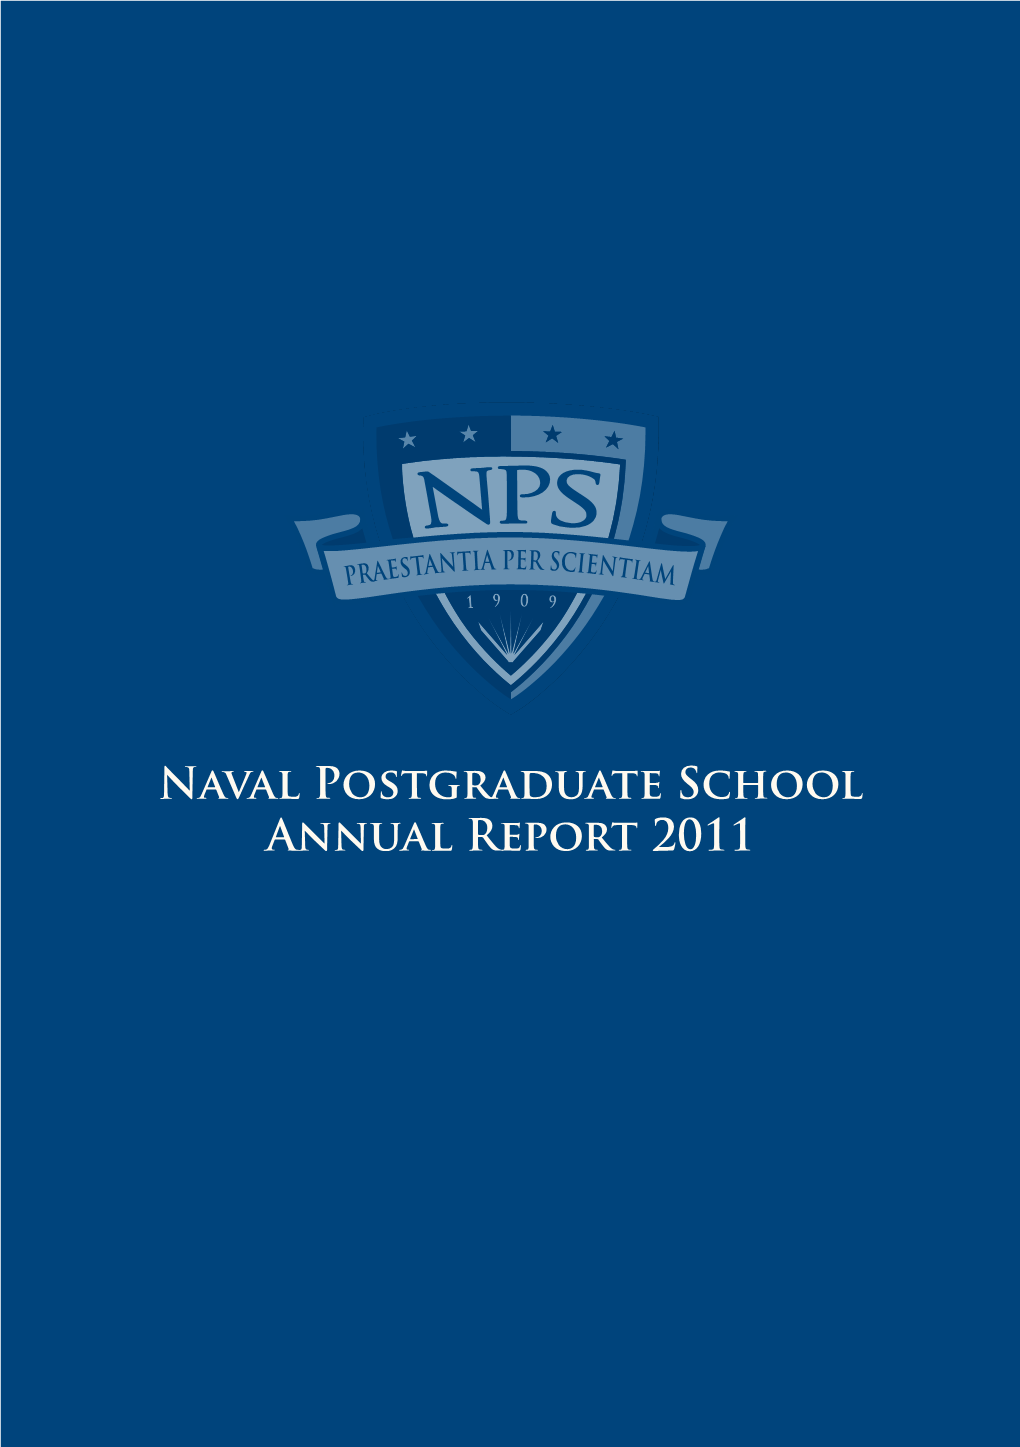 Naval Postgraduate School Annual Report 2011 “This Is a Special Place for Me